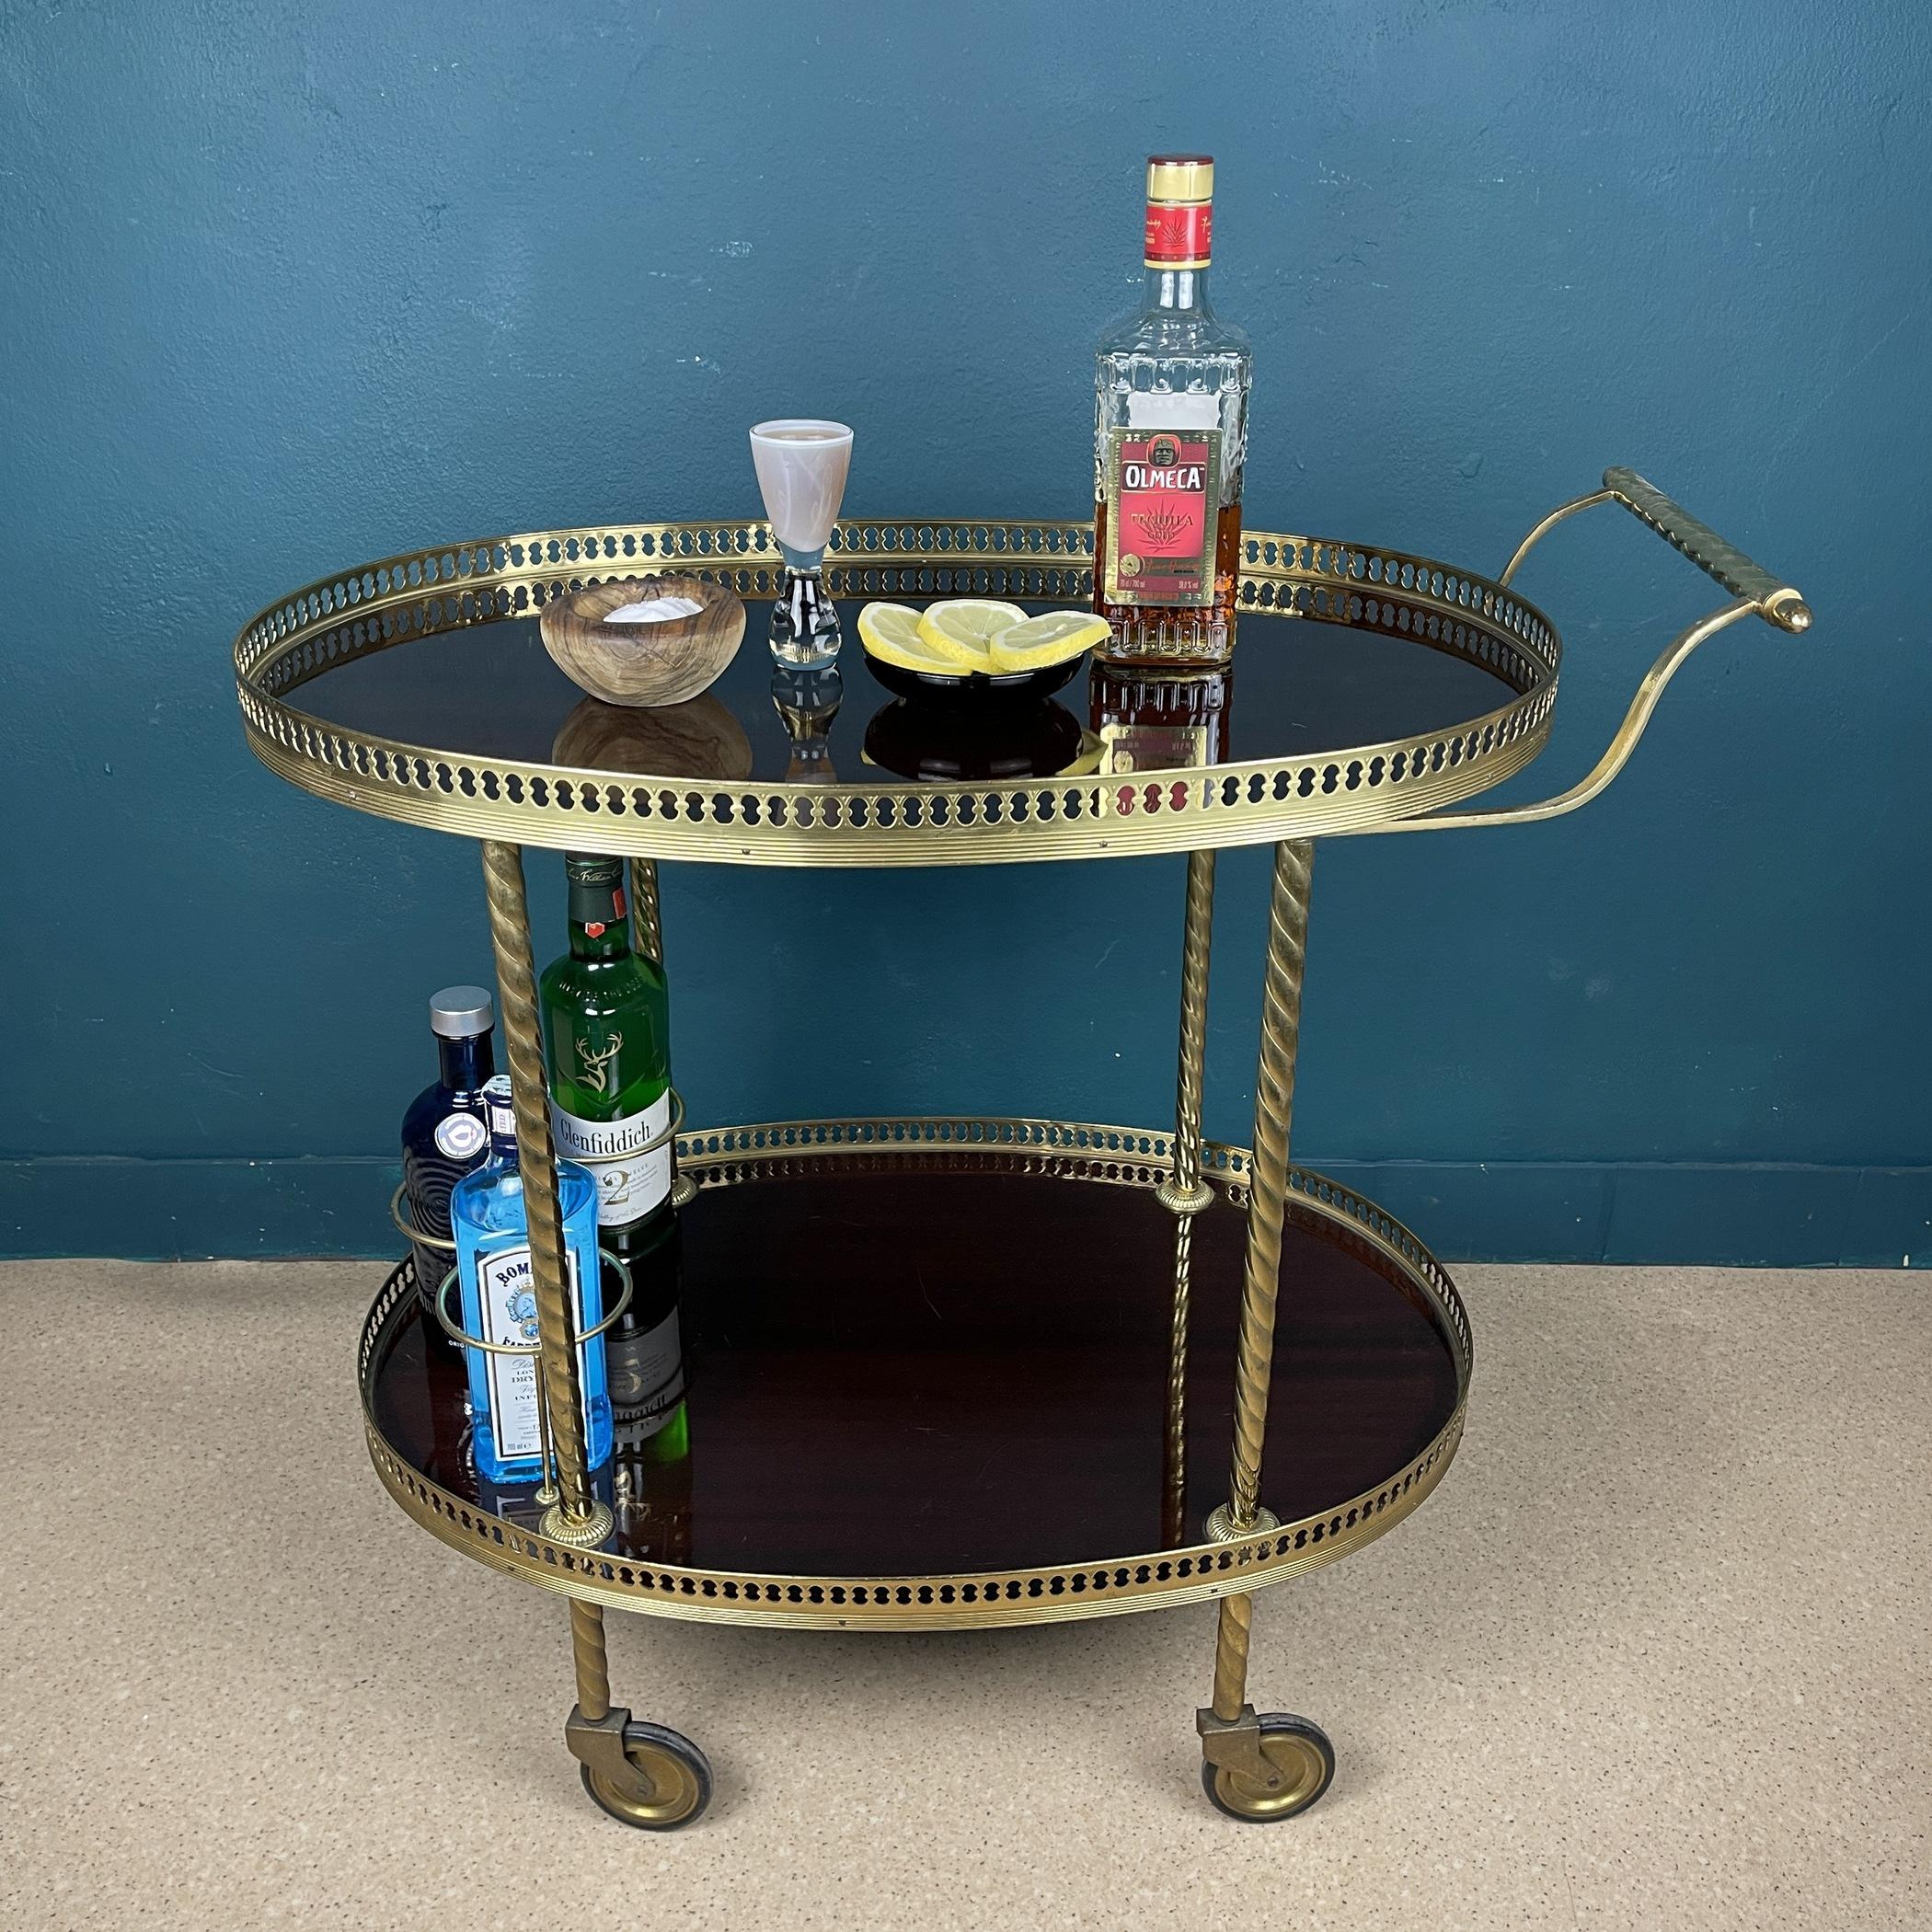 Vintage Italian trolley on 4 wheels. This cocktail bar drinks cart was made in Italy in the 1960s Hollywood Regency style. It has surrounded by a filigree brass railing around an oval tray. Original brass wheels.
The bottom plate has a bottle